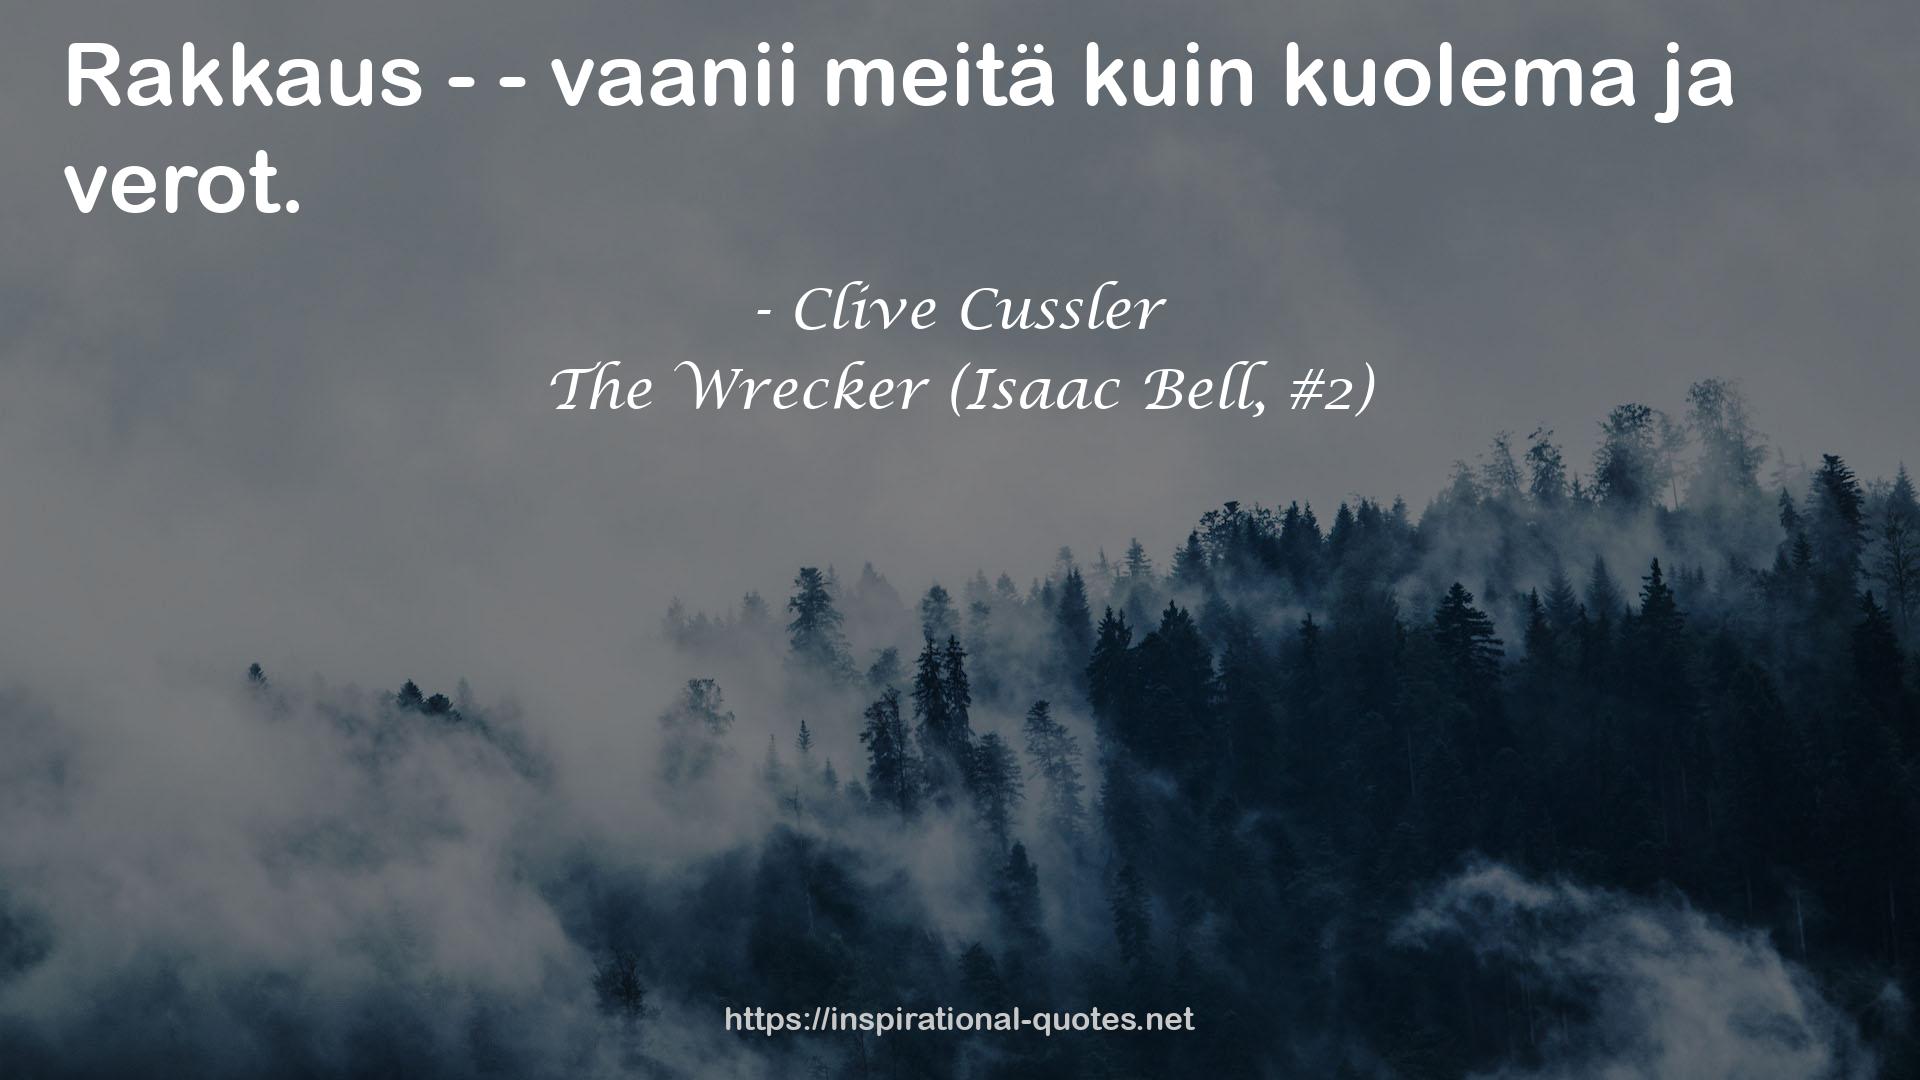 The Wrecker (Isaac Bell, #2) QUOTES